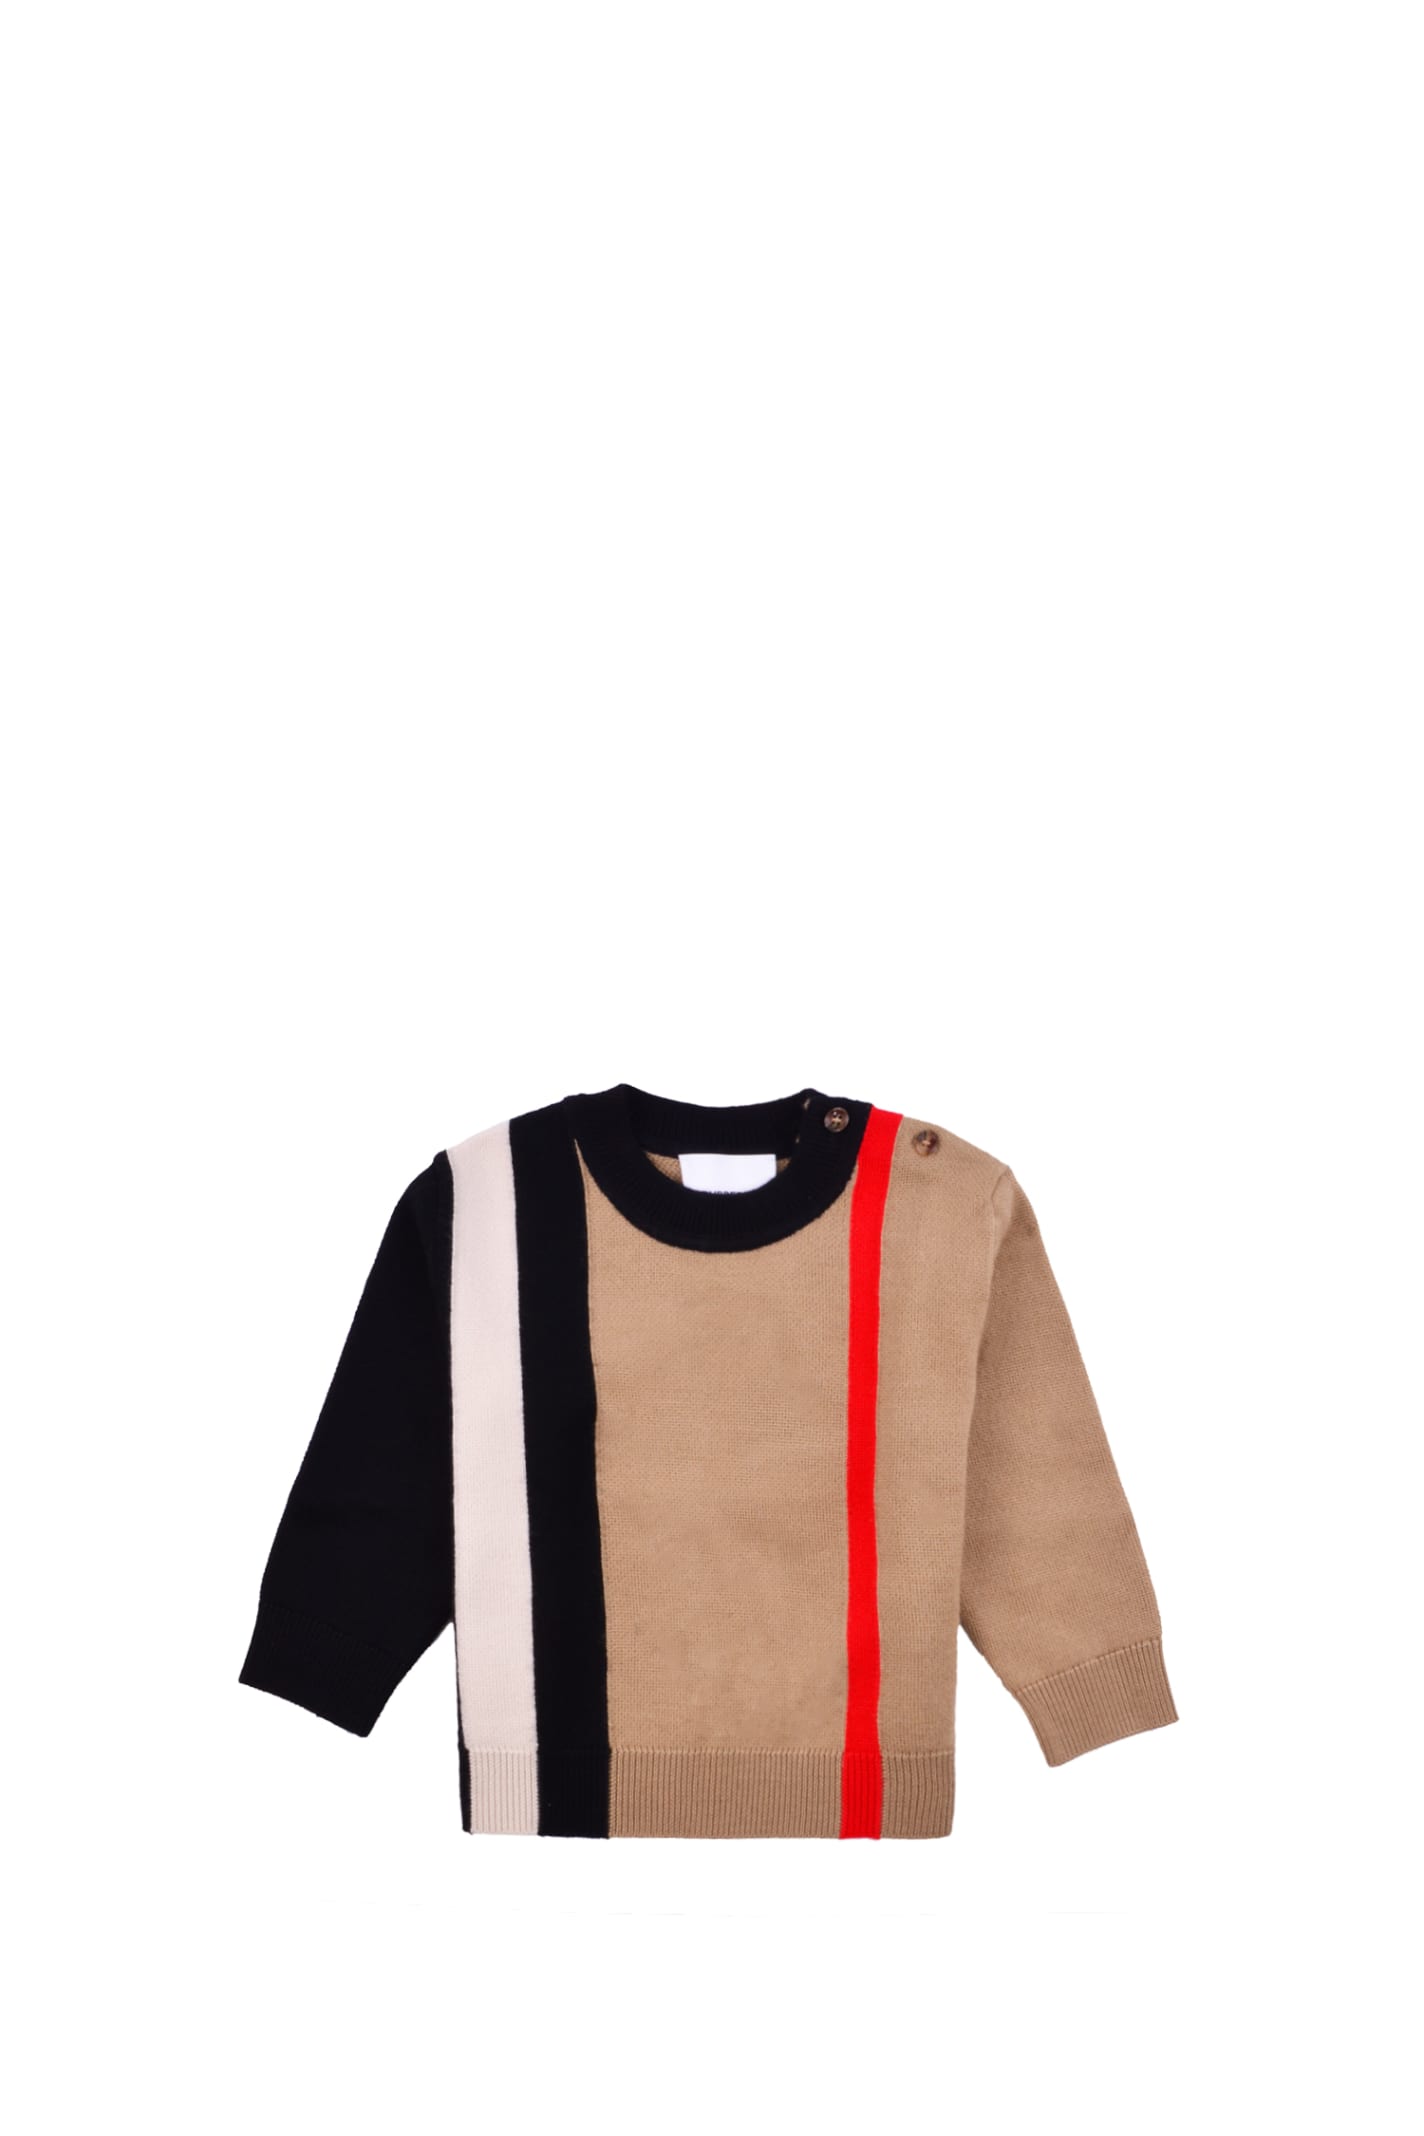 Burberry Wool Pullover With Intarsia Stripe Pattern